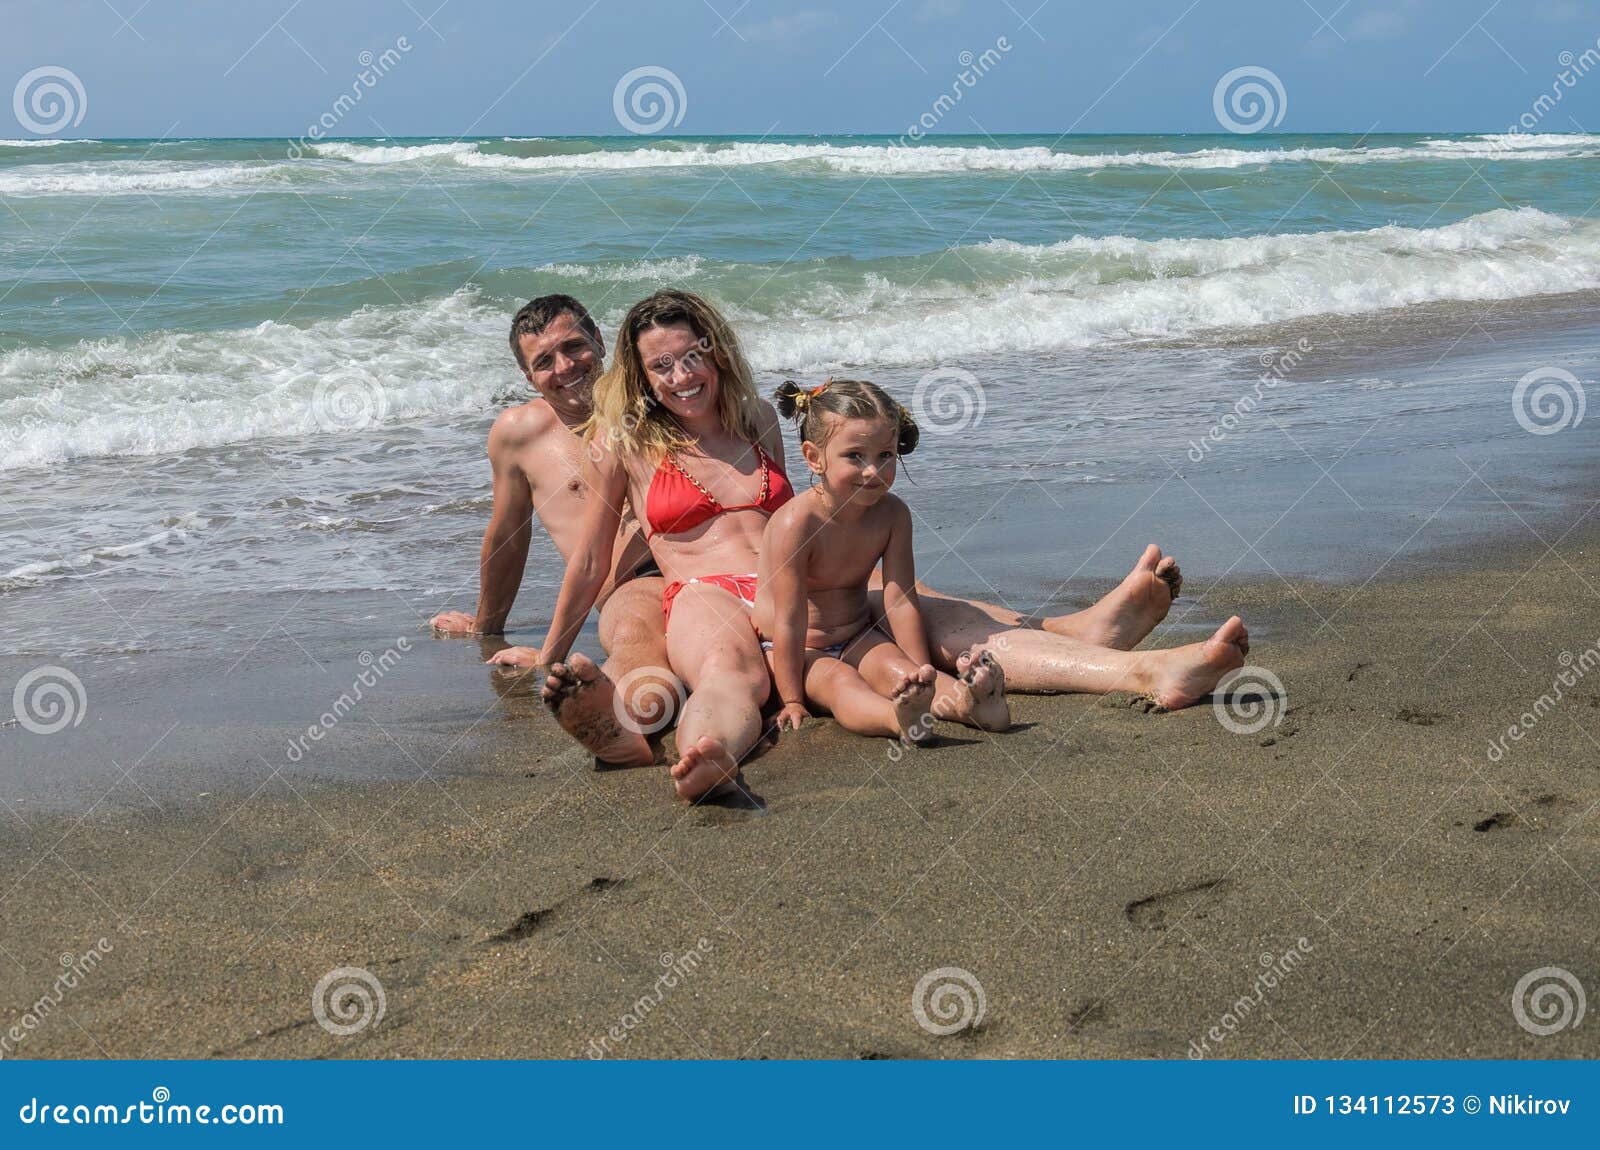 dad daughter nude in beach hd photo